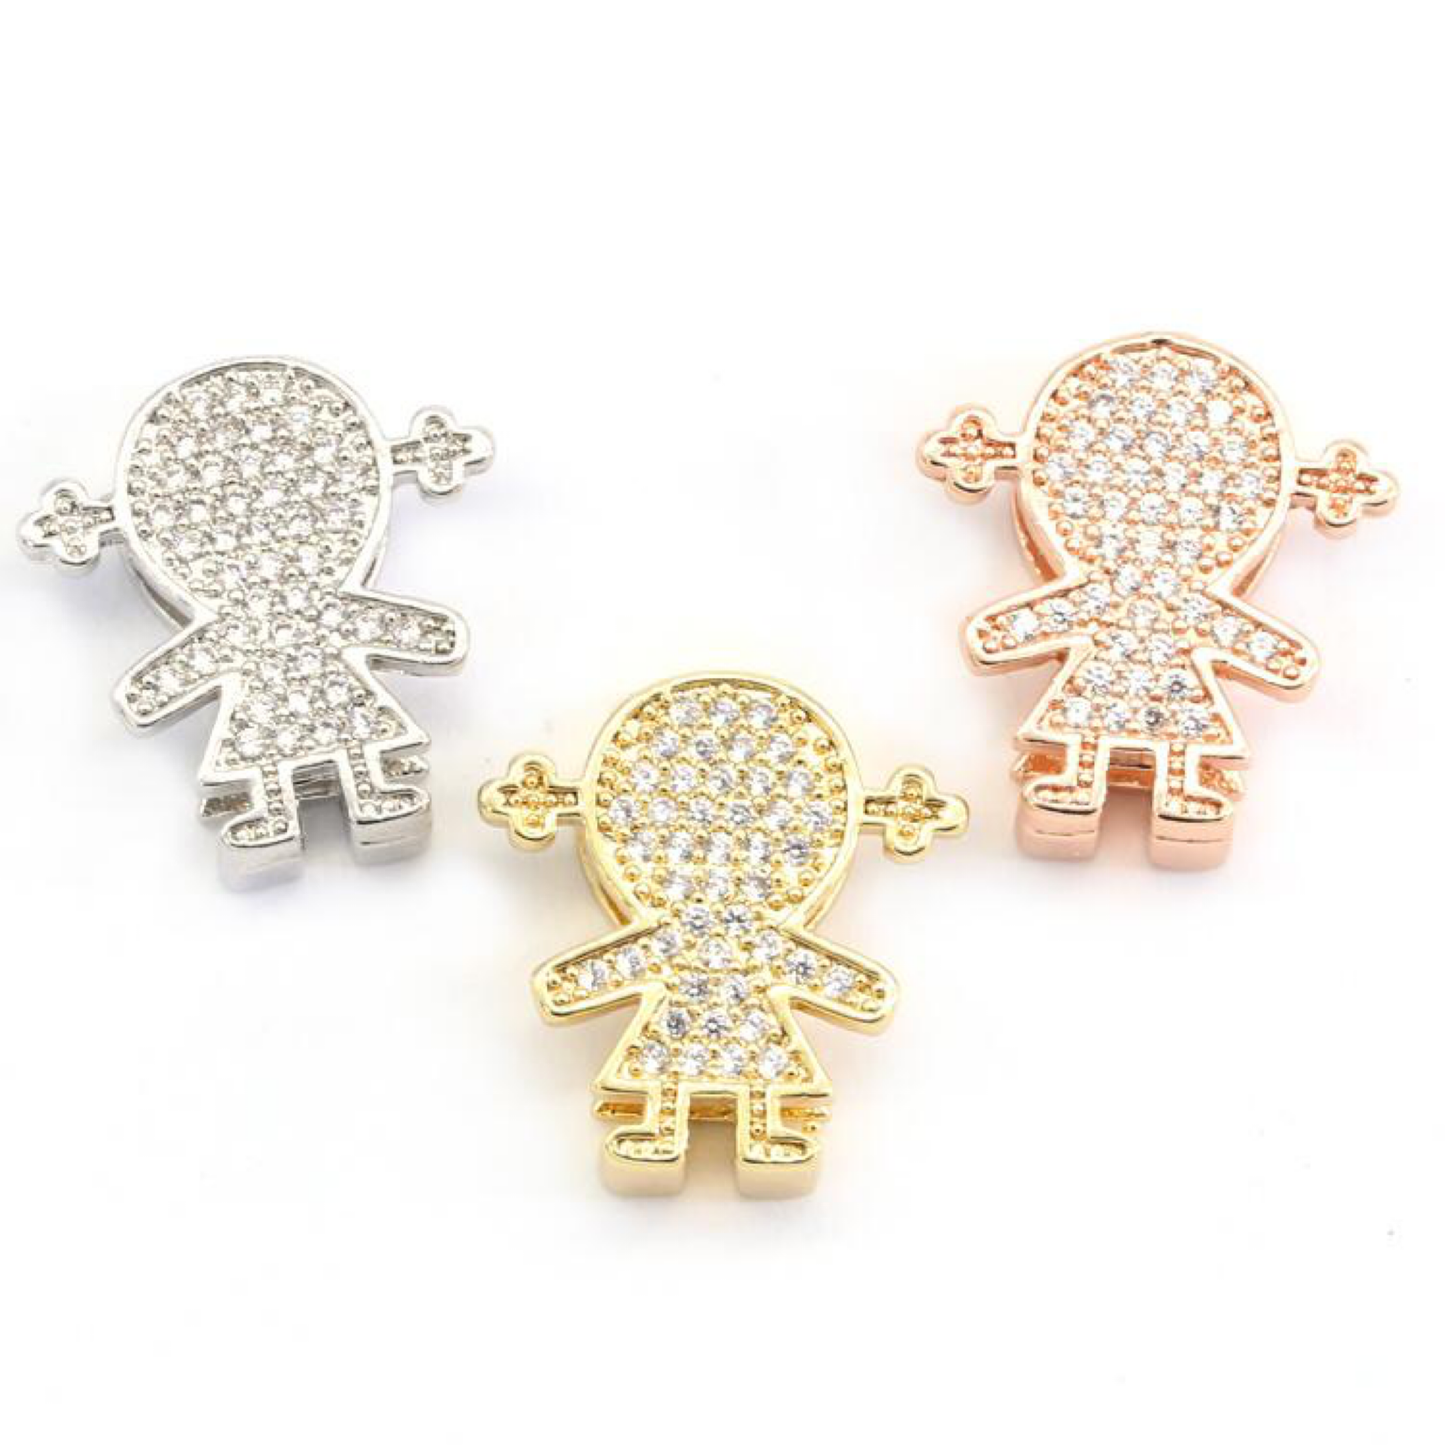 STUDDED GIRL CHARMS LIFE COLLECTION - Unique Brazilian Jewelry (4503193976907)